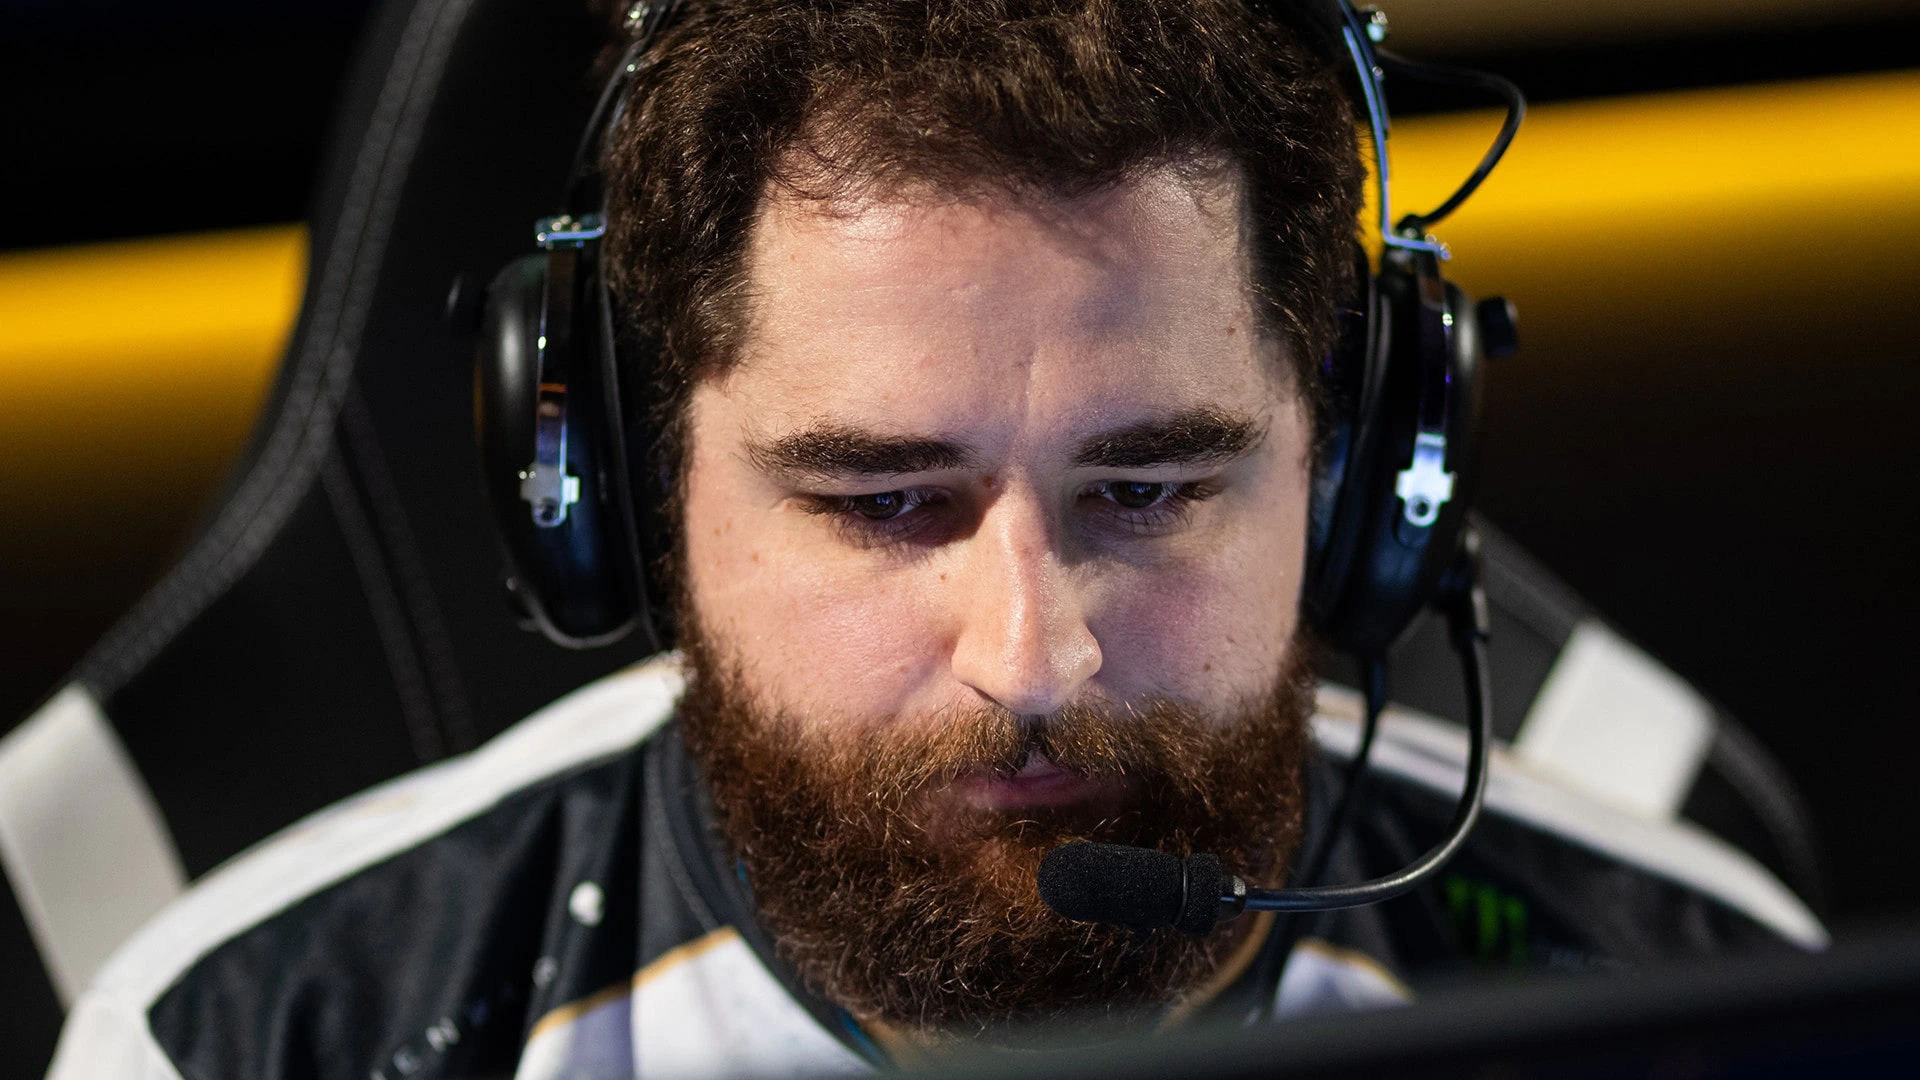 FalleN reportedly set to sign with FURIA after recent meeting with organization